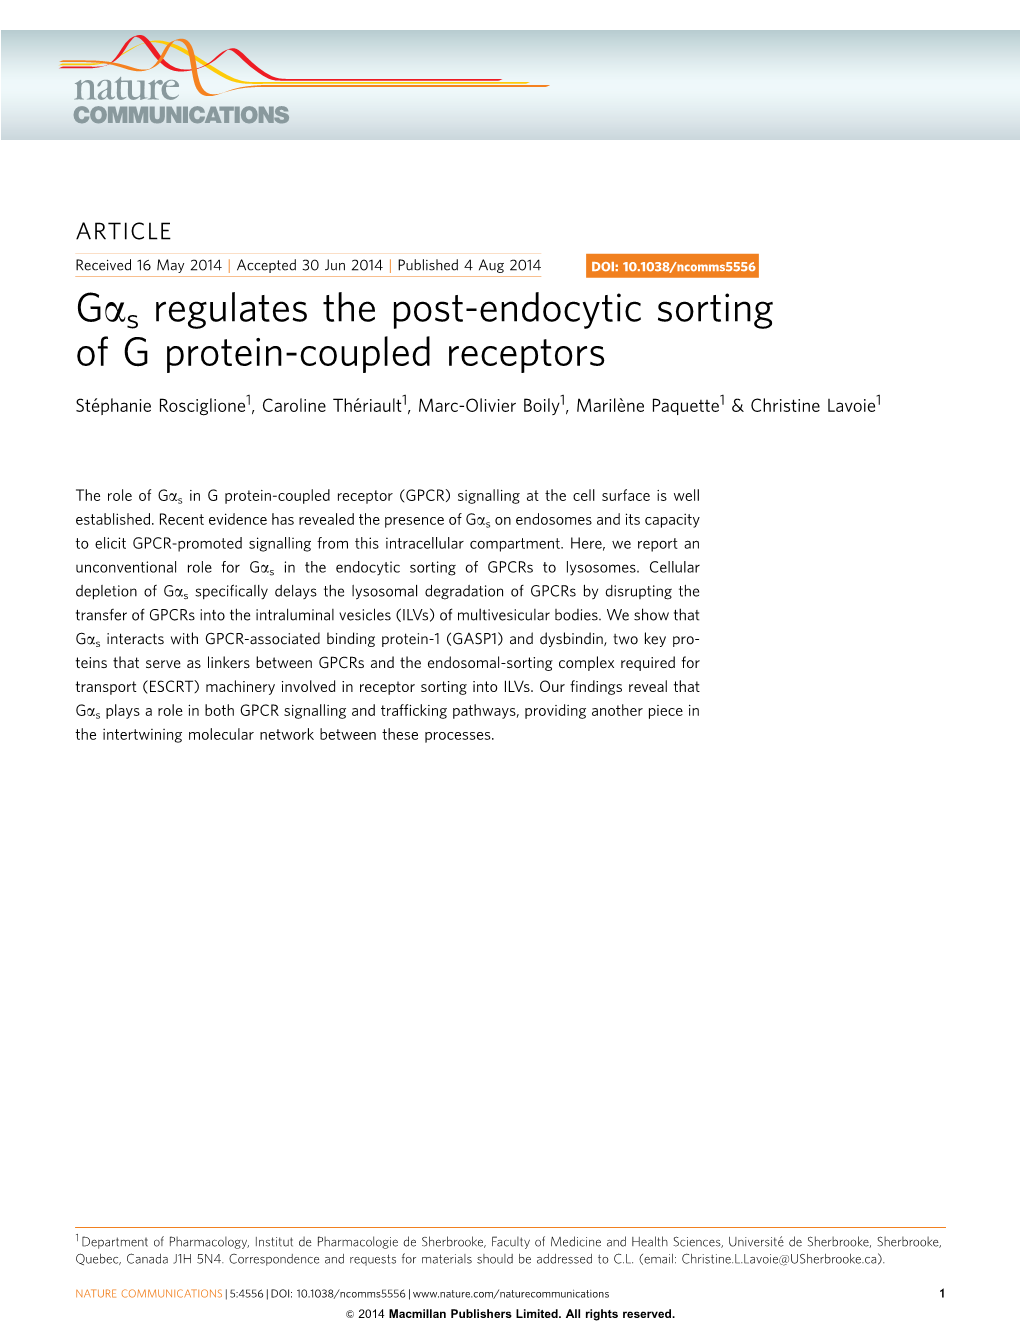 S Regulates the Post-Endocytic Sorting of G Protein-Coupled Receptors